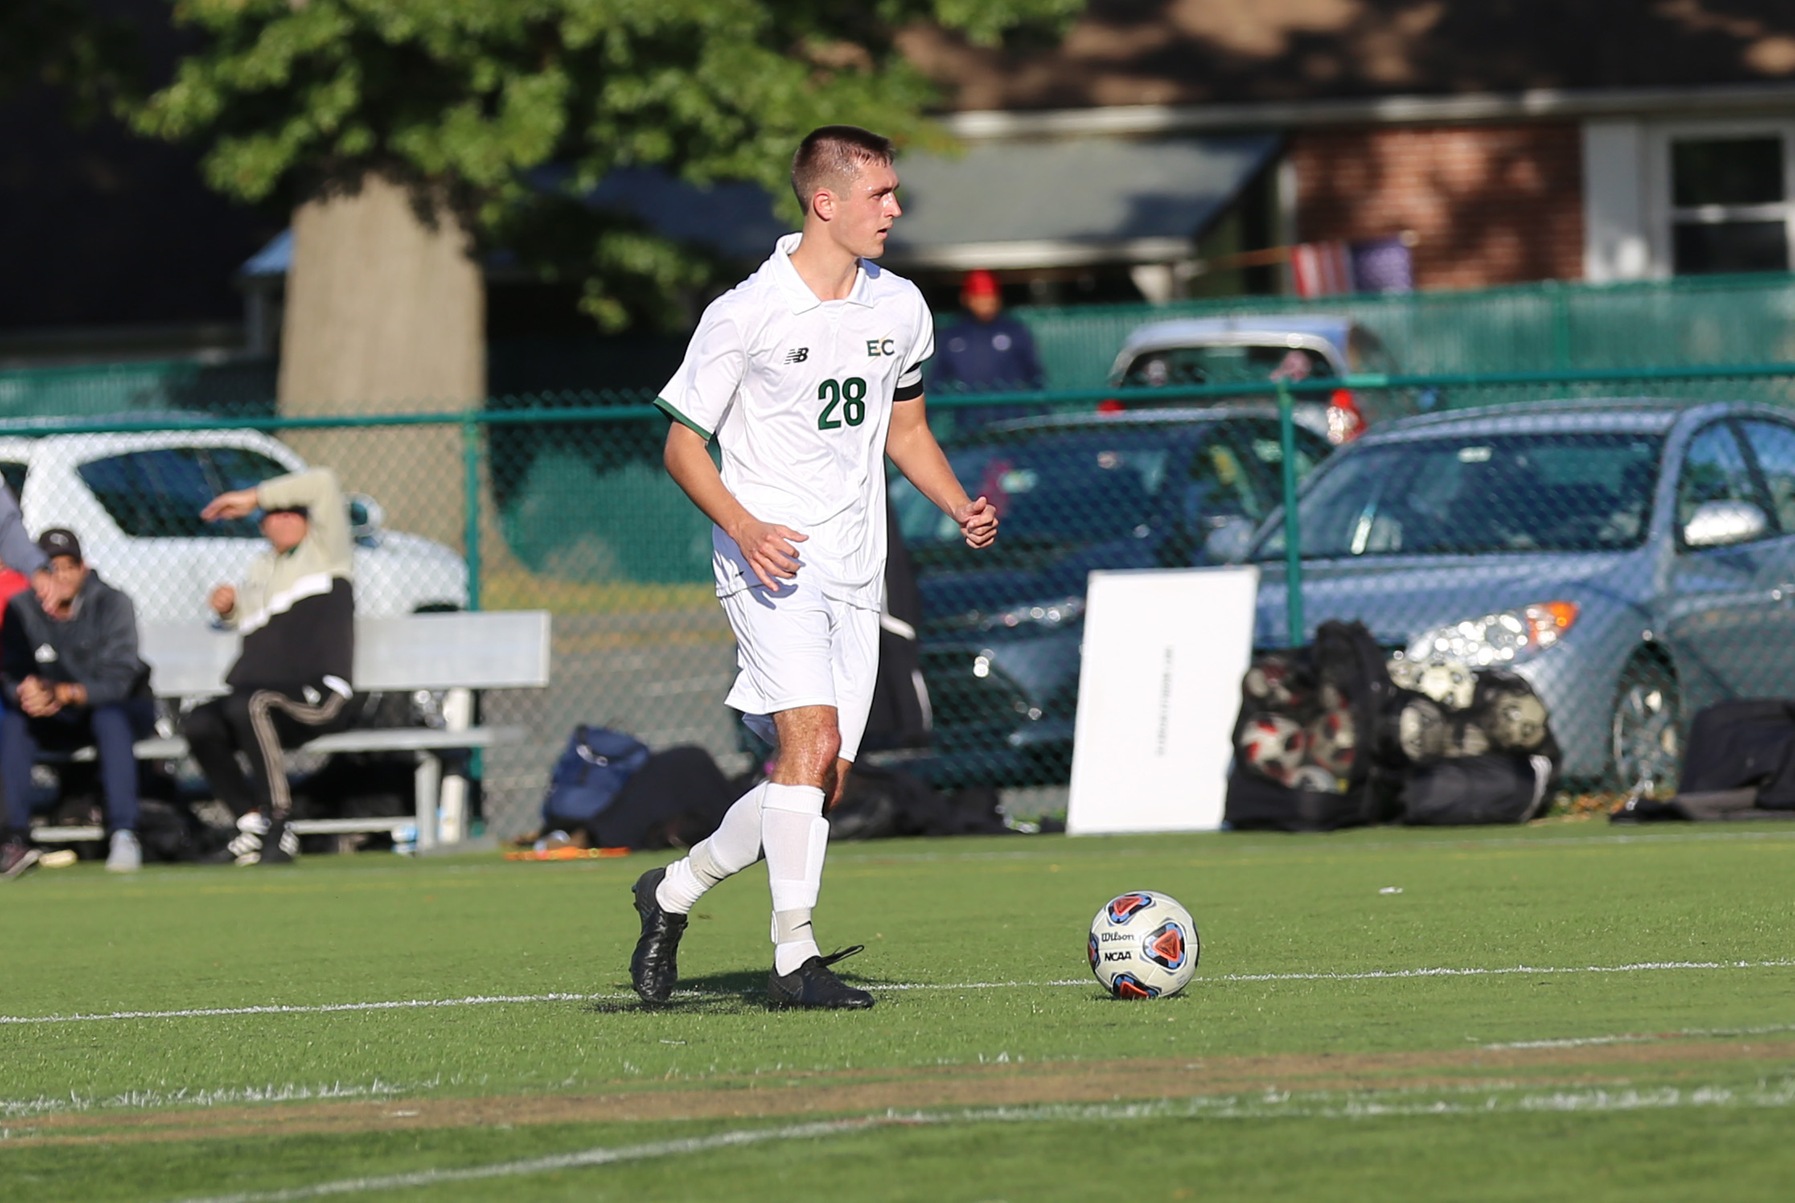 Men’s Soccer Goes 1-0-1 in Weekend Home and Home with Becker